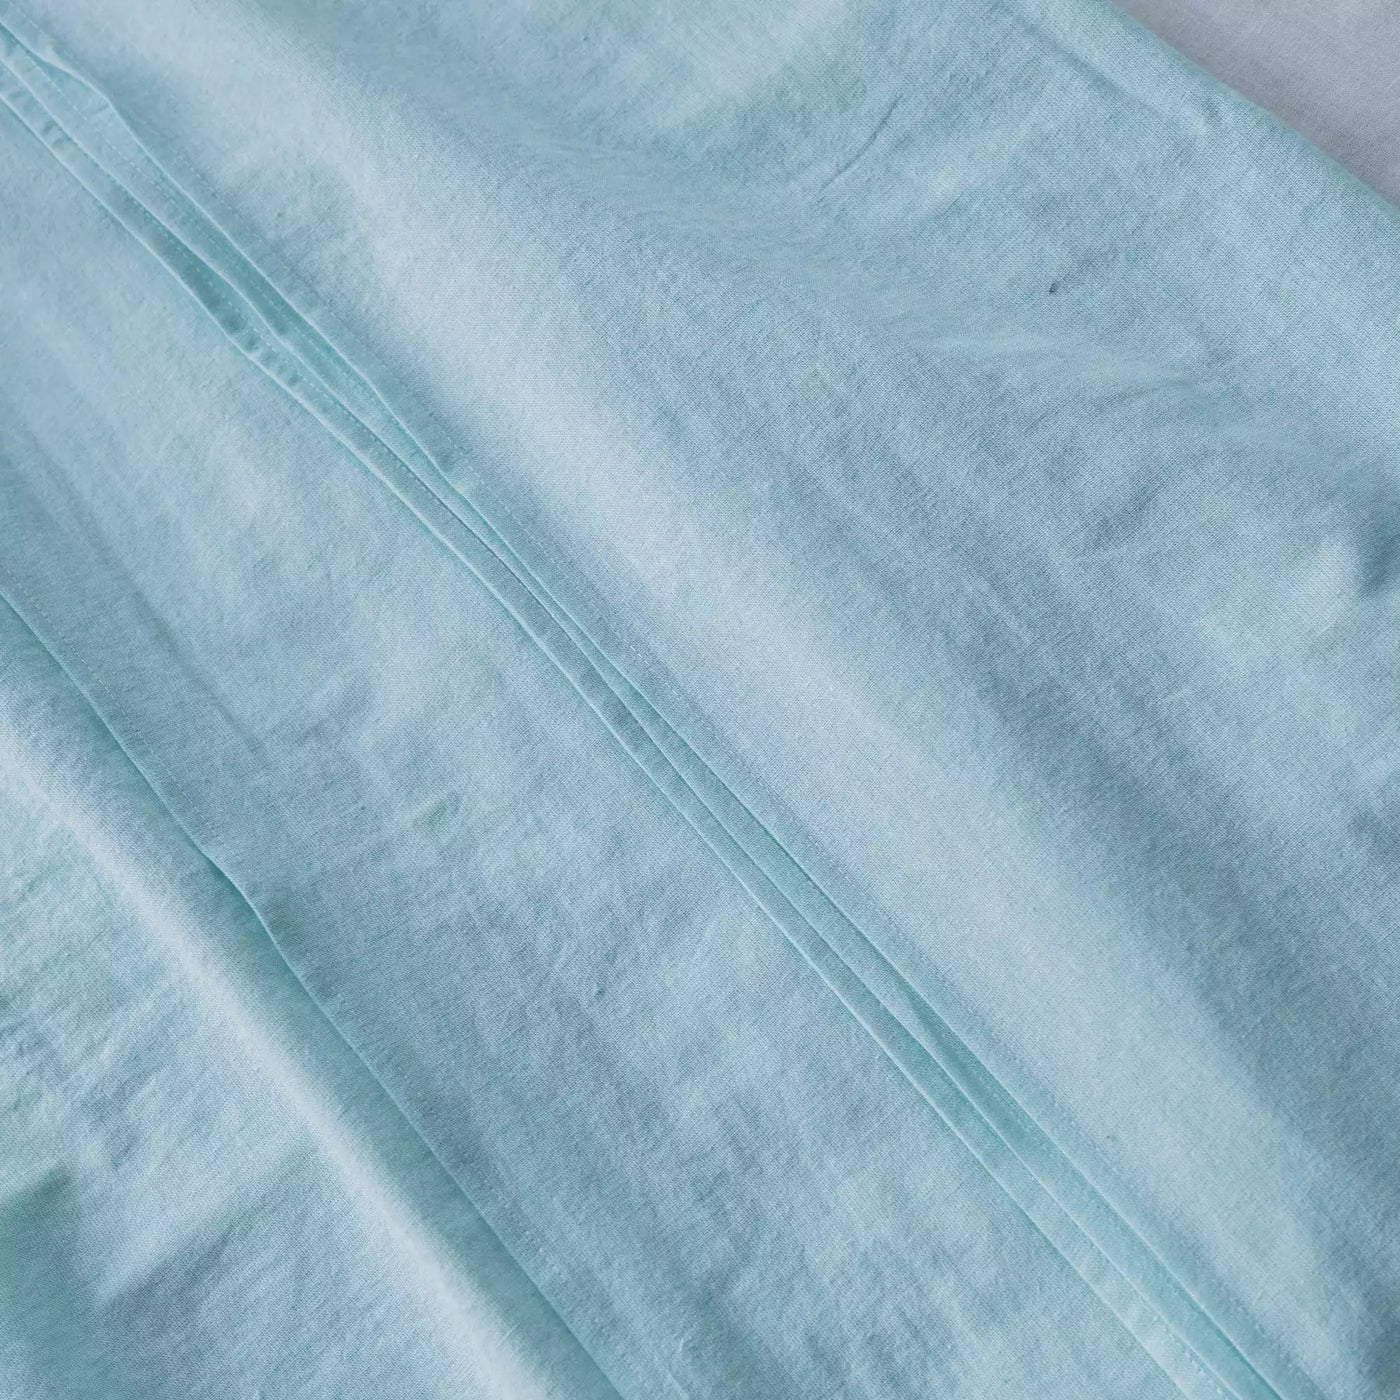 Linen & Cotton Bedding set with Duvet cover 135x200 in Turquoise Melange